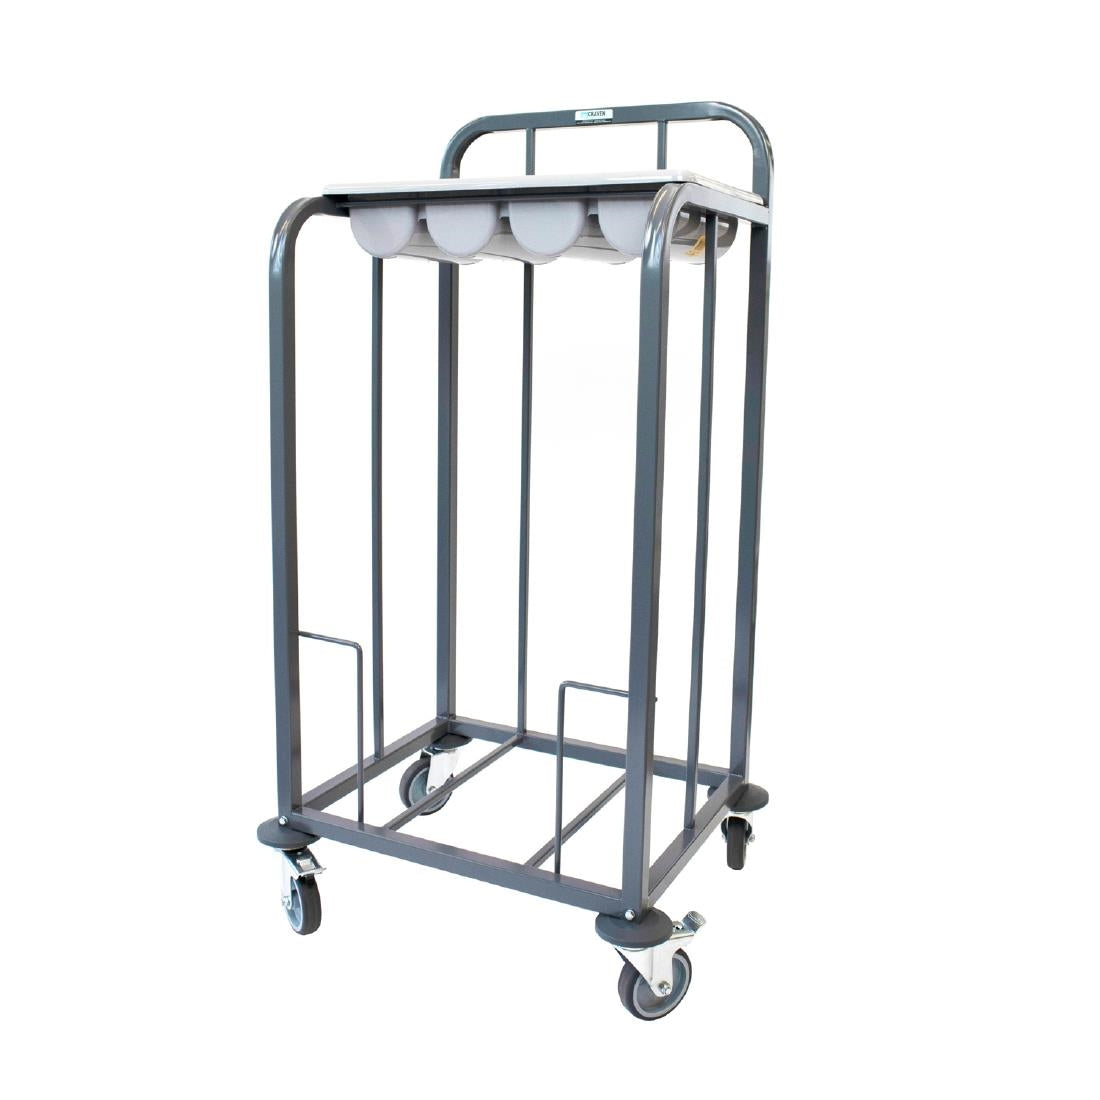 GG138 Craven Steel Single Tier Cutlery and Tray Dispense Trolley JD Catering Equipment Solutions Ltd